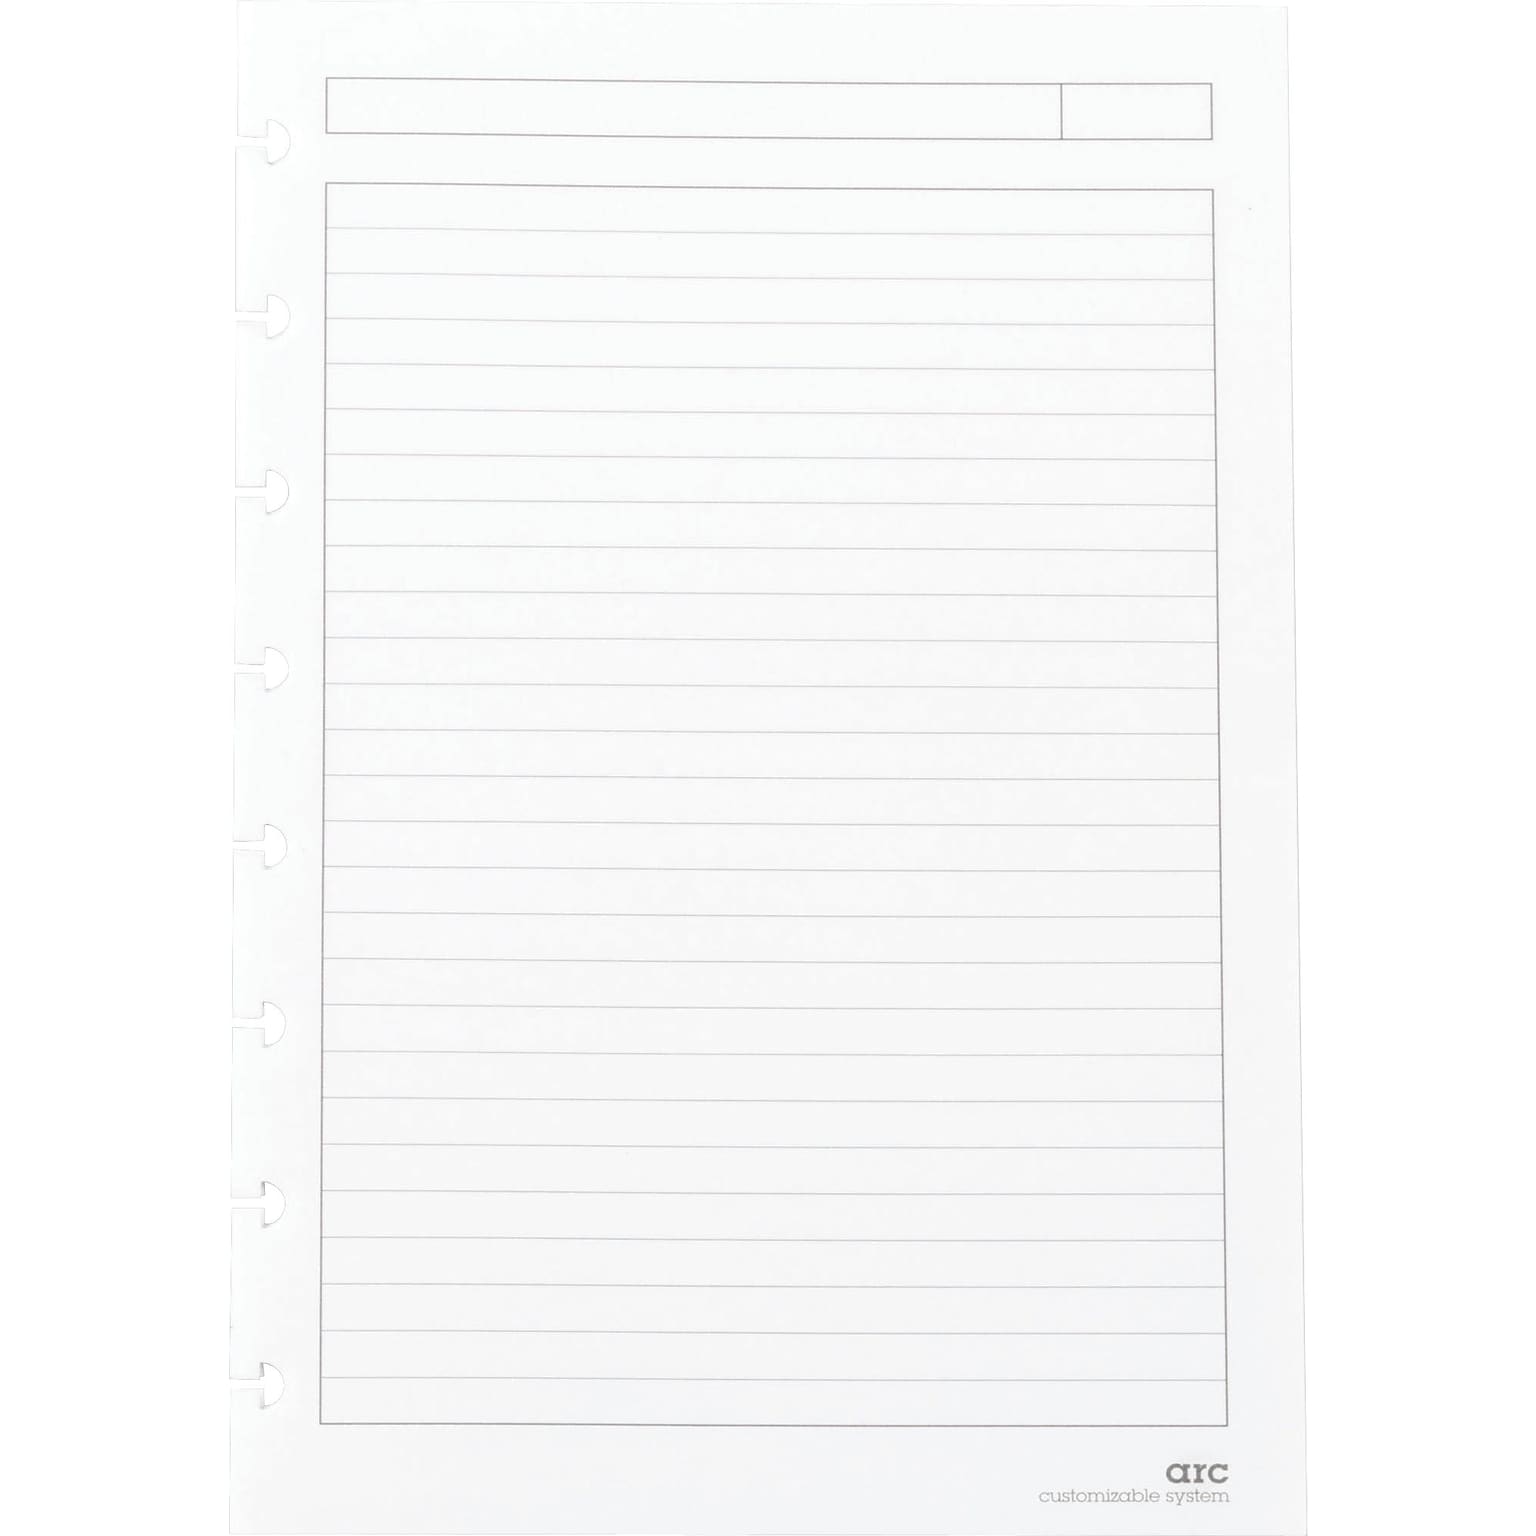 Staples® Arc Notebook System Premium Refill Paper, 5.5 x 8.5, 50 Sheets, Narrow Ruled, Cream (19993)